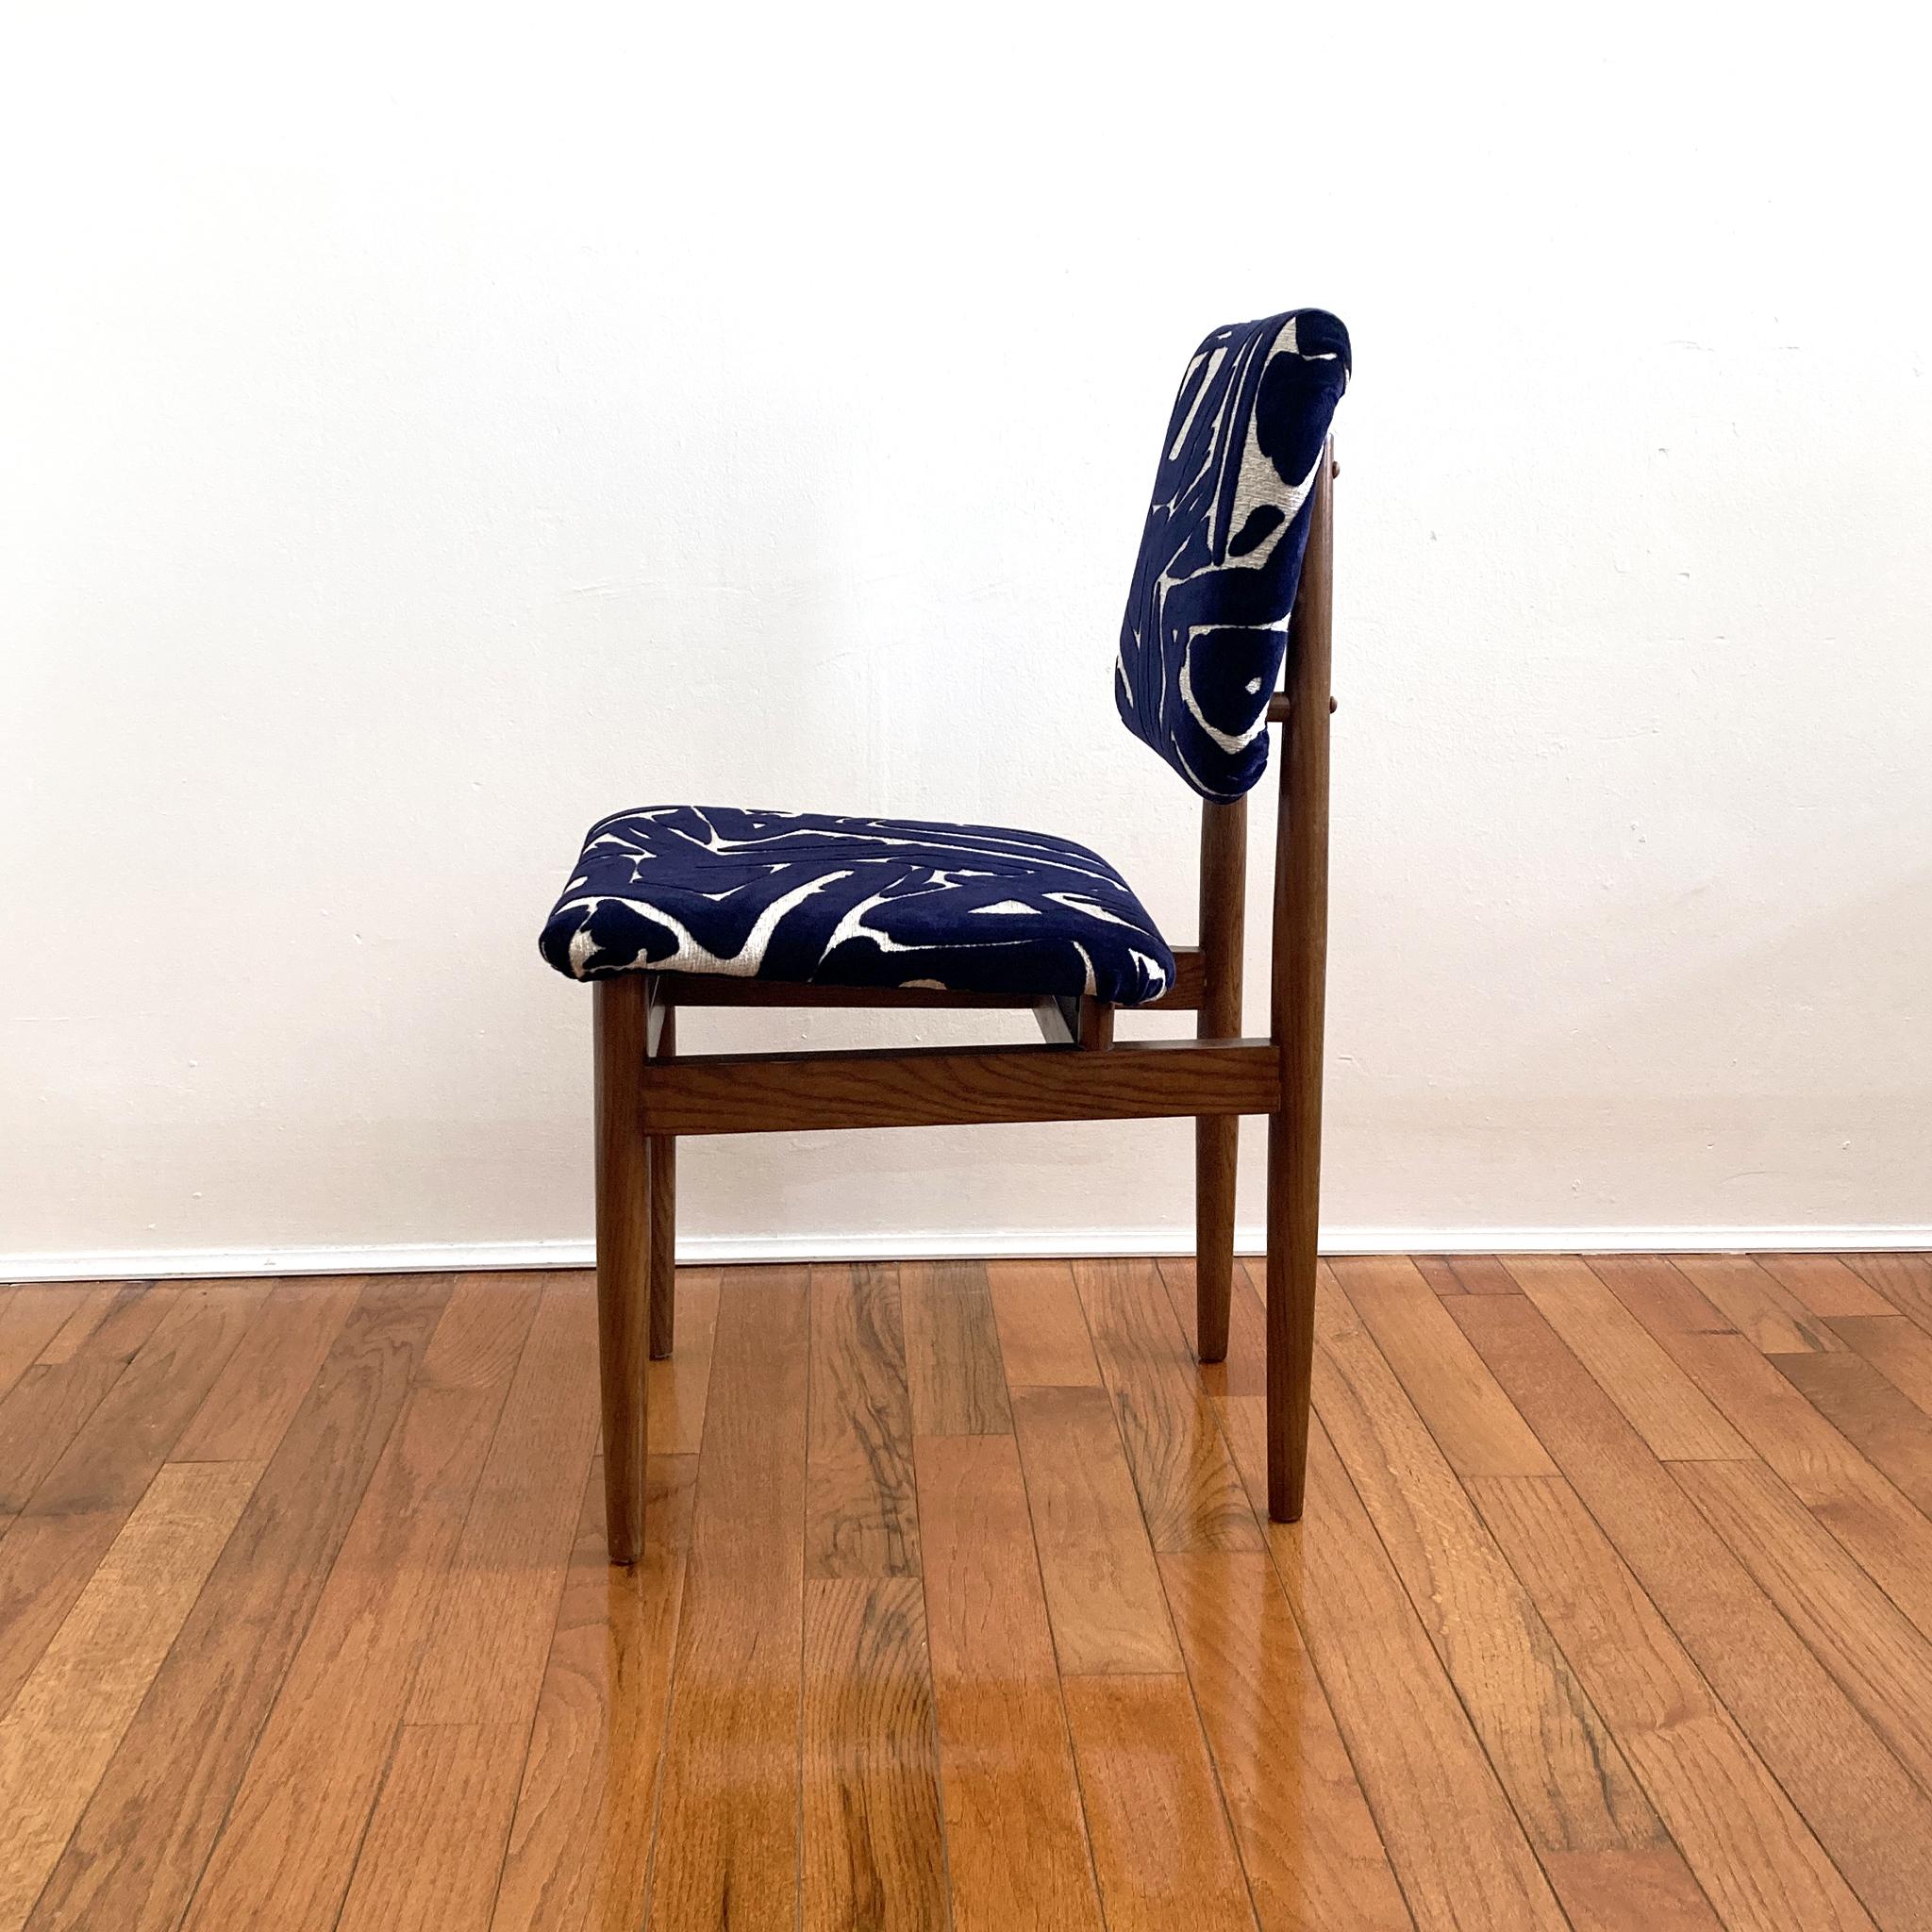 Arne Vodder Style Midcentury Chair Reupholstered in Abstract Blue and Ecru For Sale 4